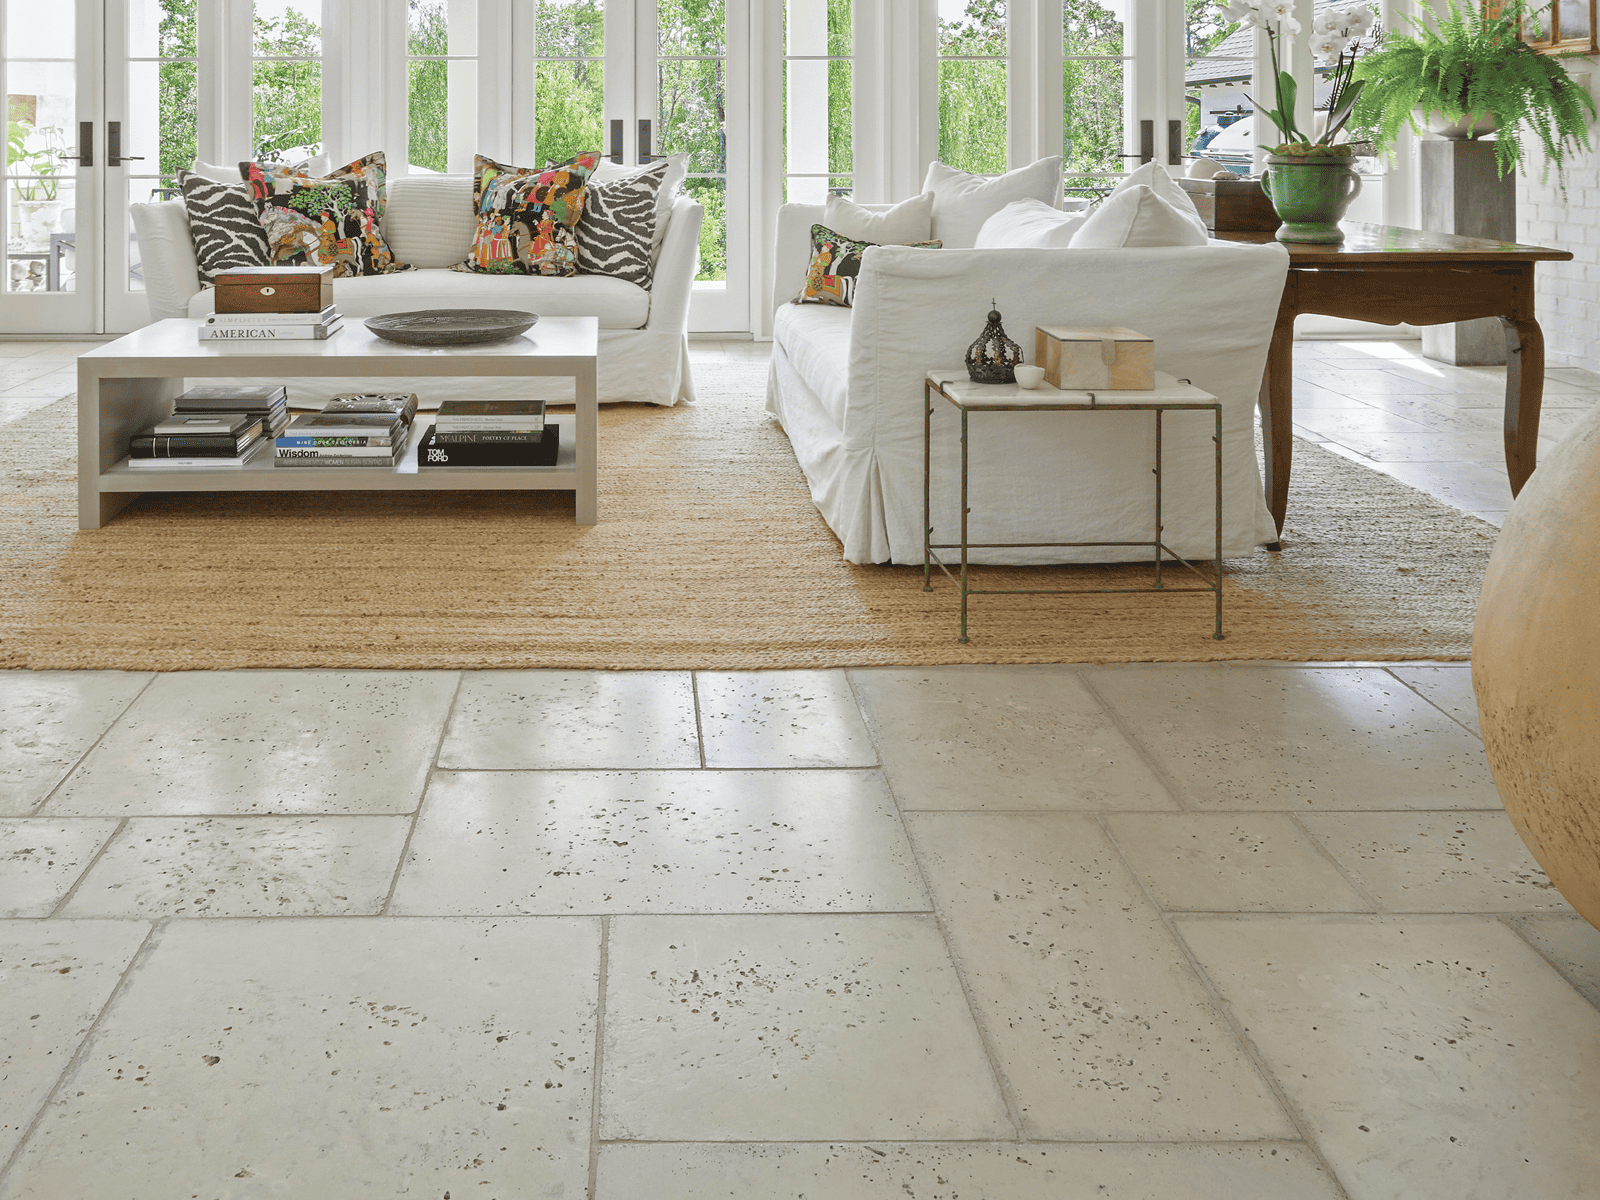 Environmentally-friendly concrete pavers in the living room